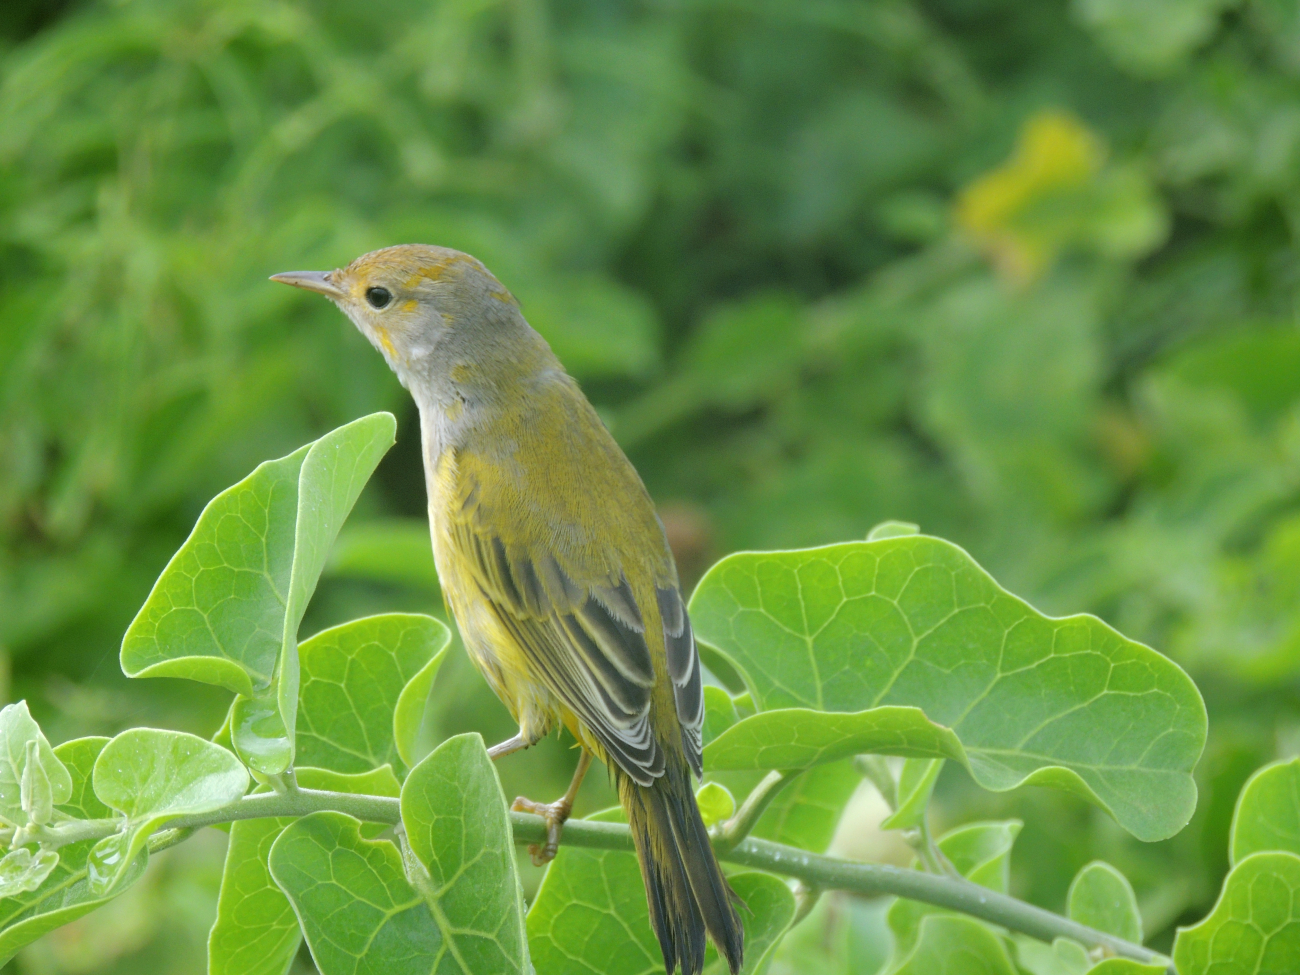 A yellow finch, a member of the group known as Darwin's finches